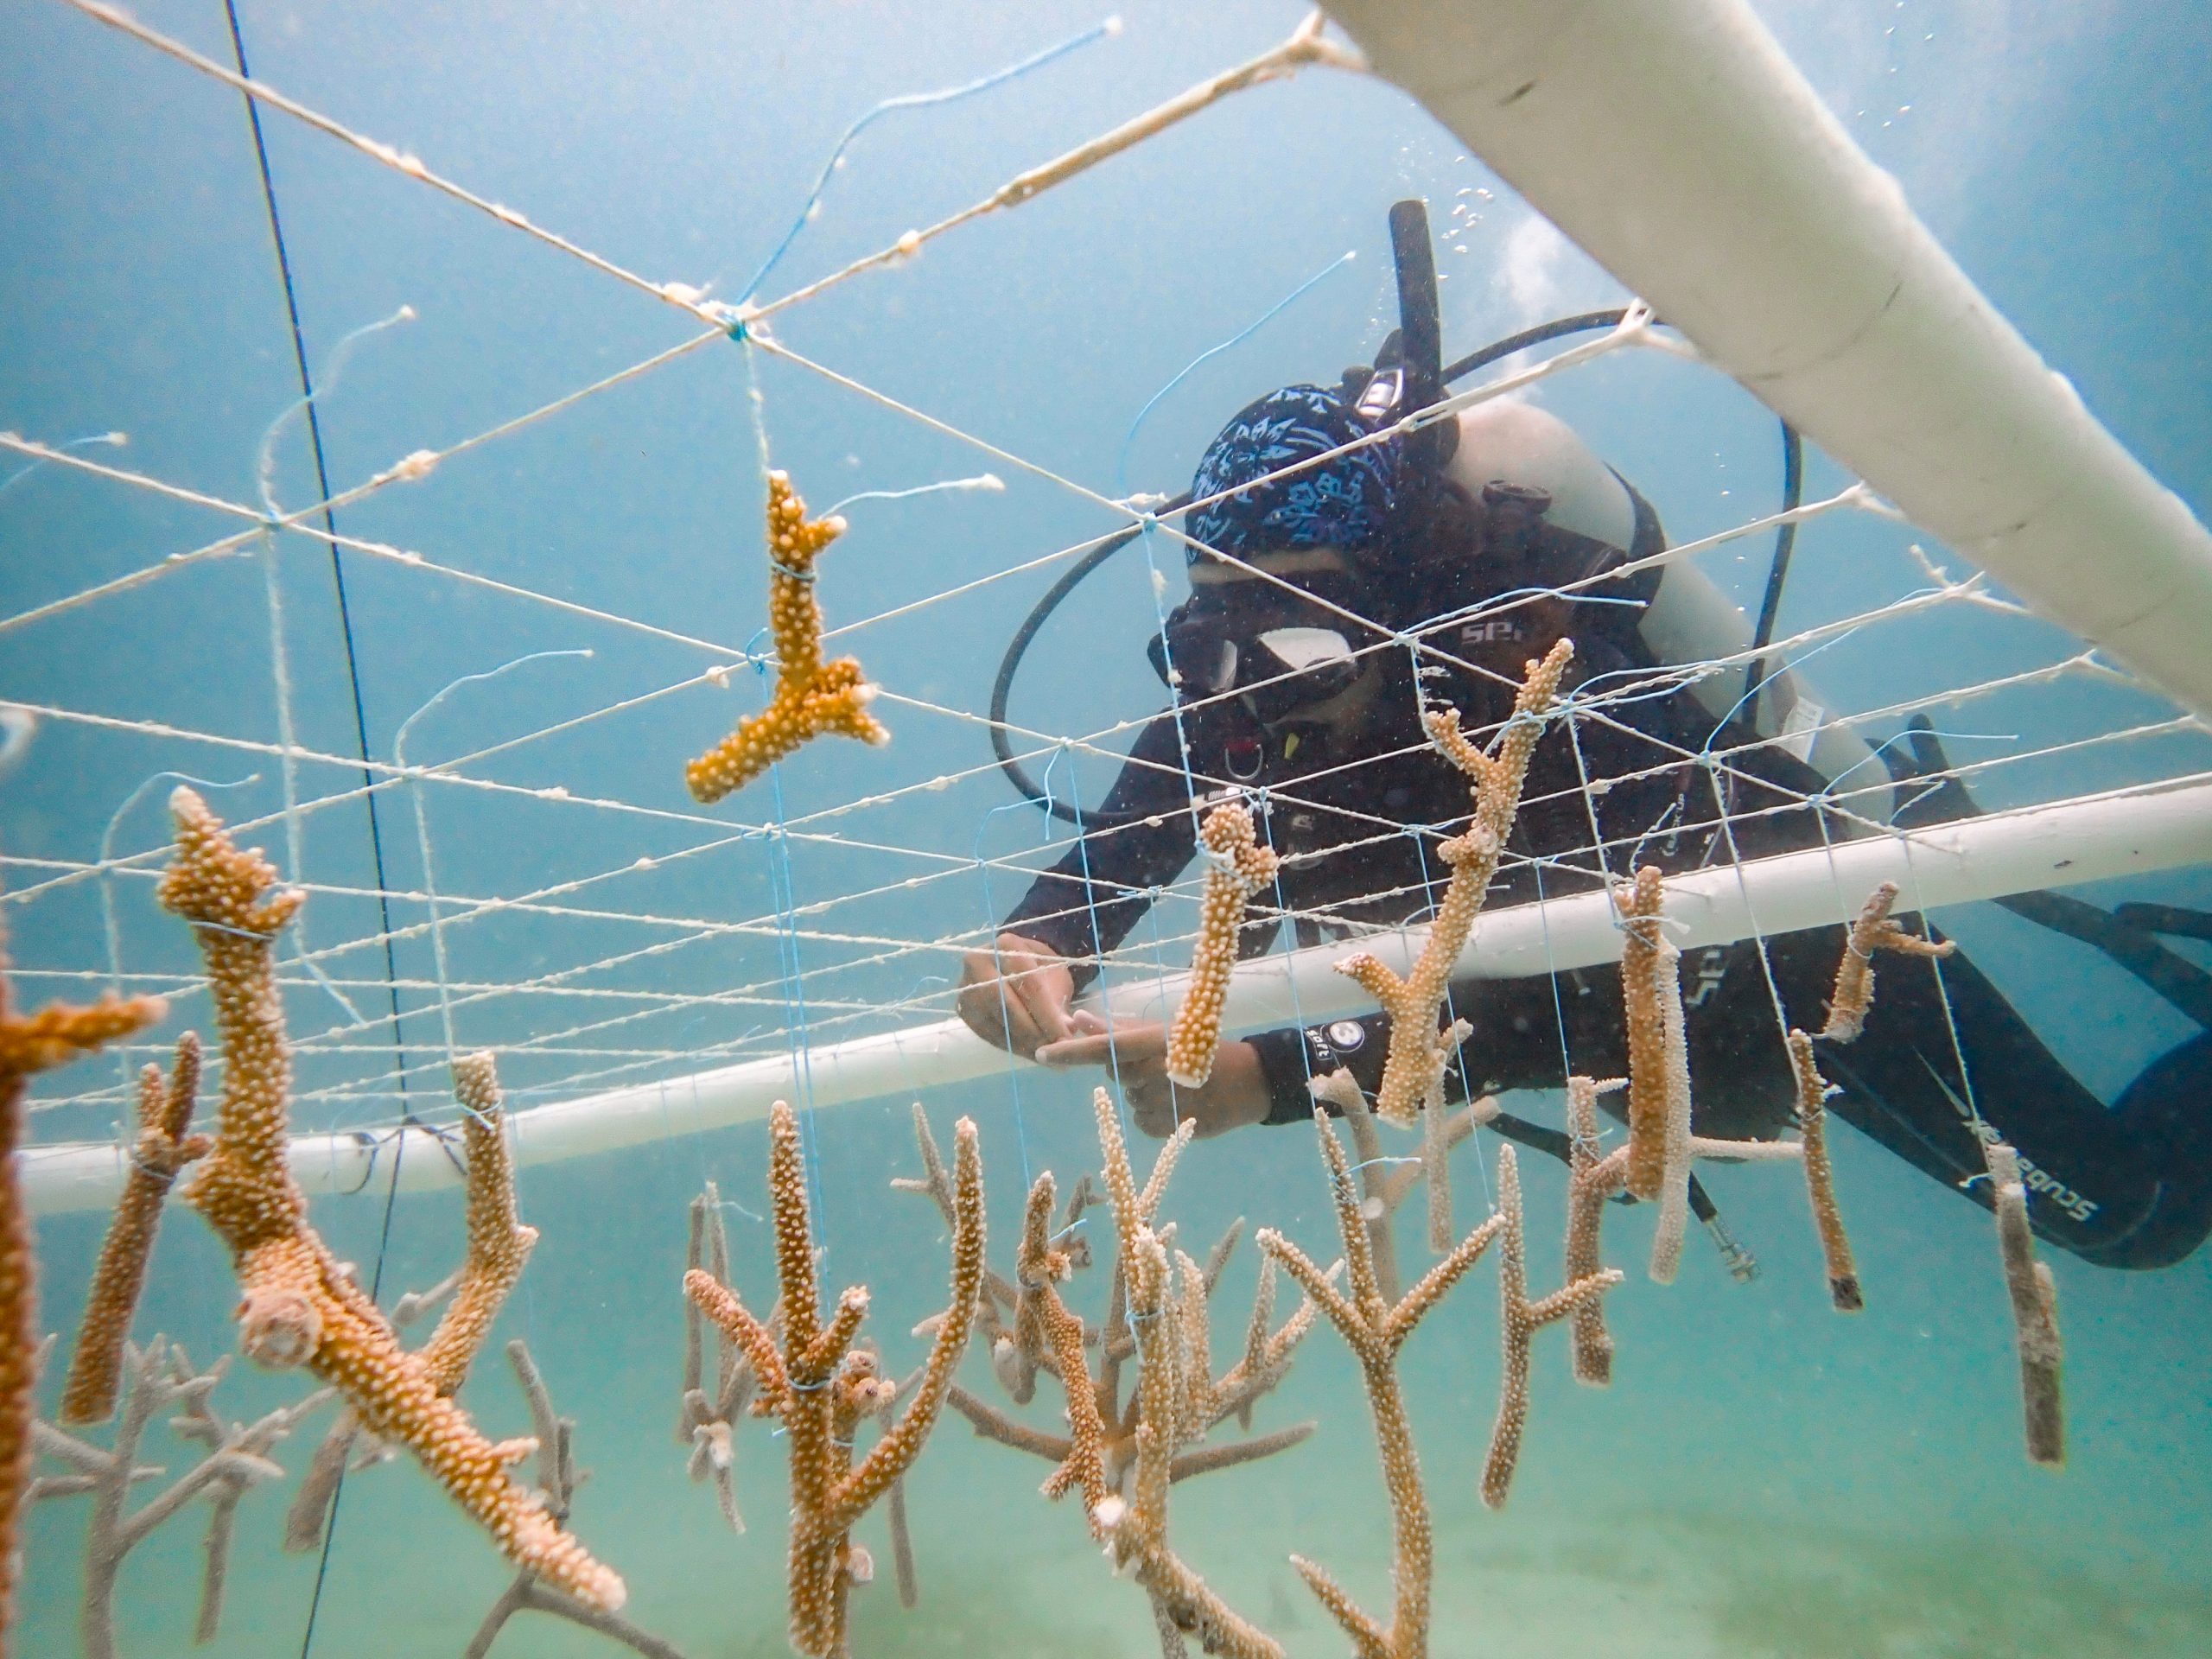 Diver tying netting to a coral reef nursery